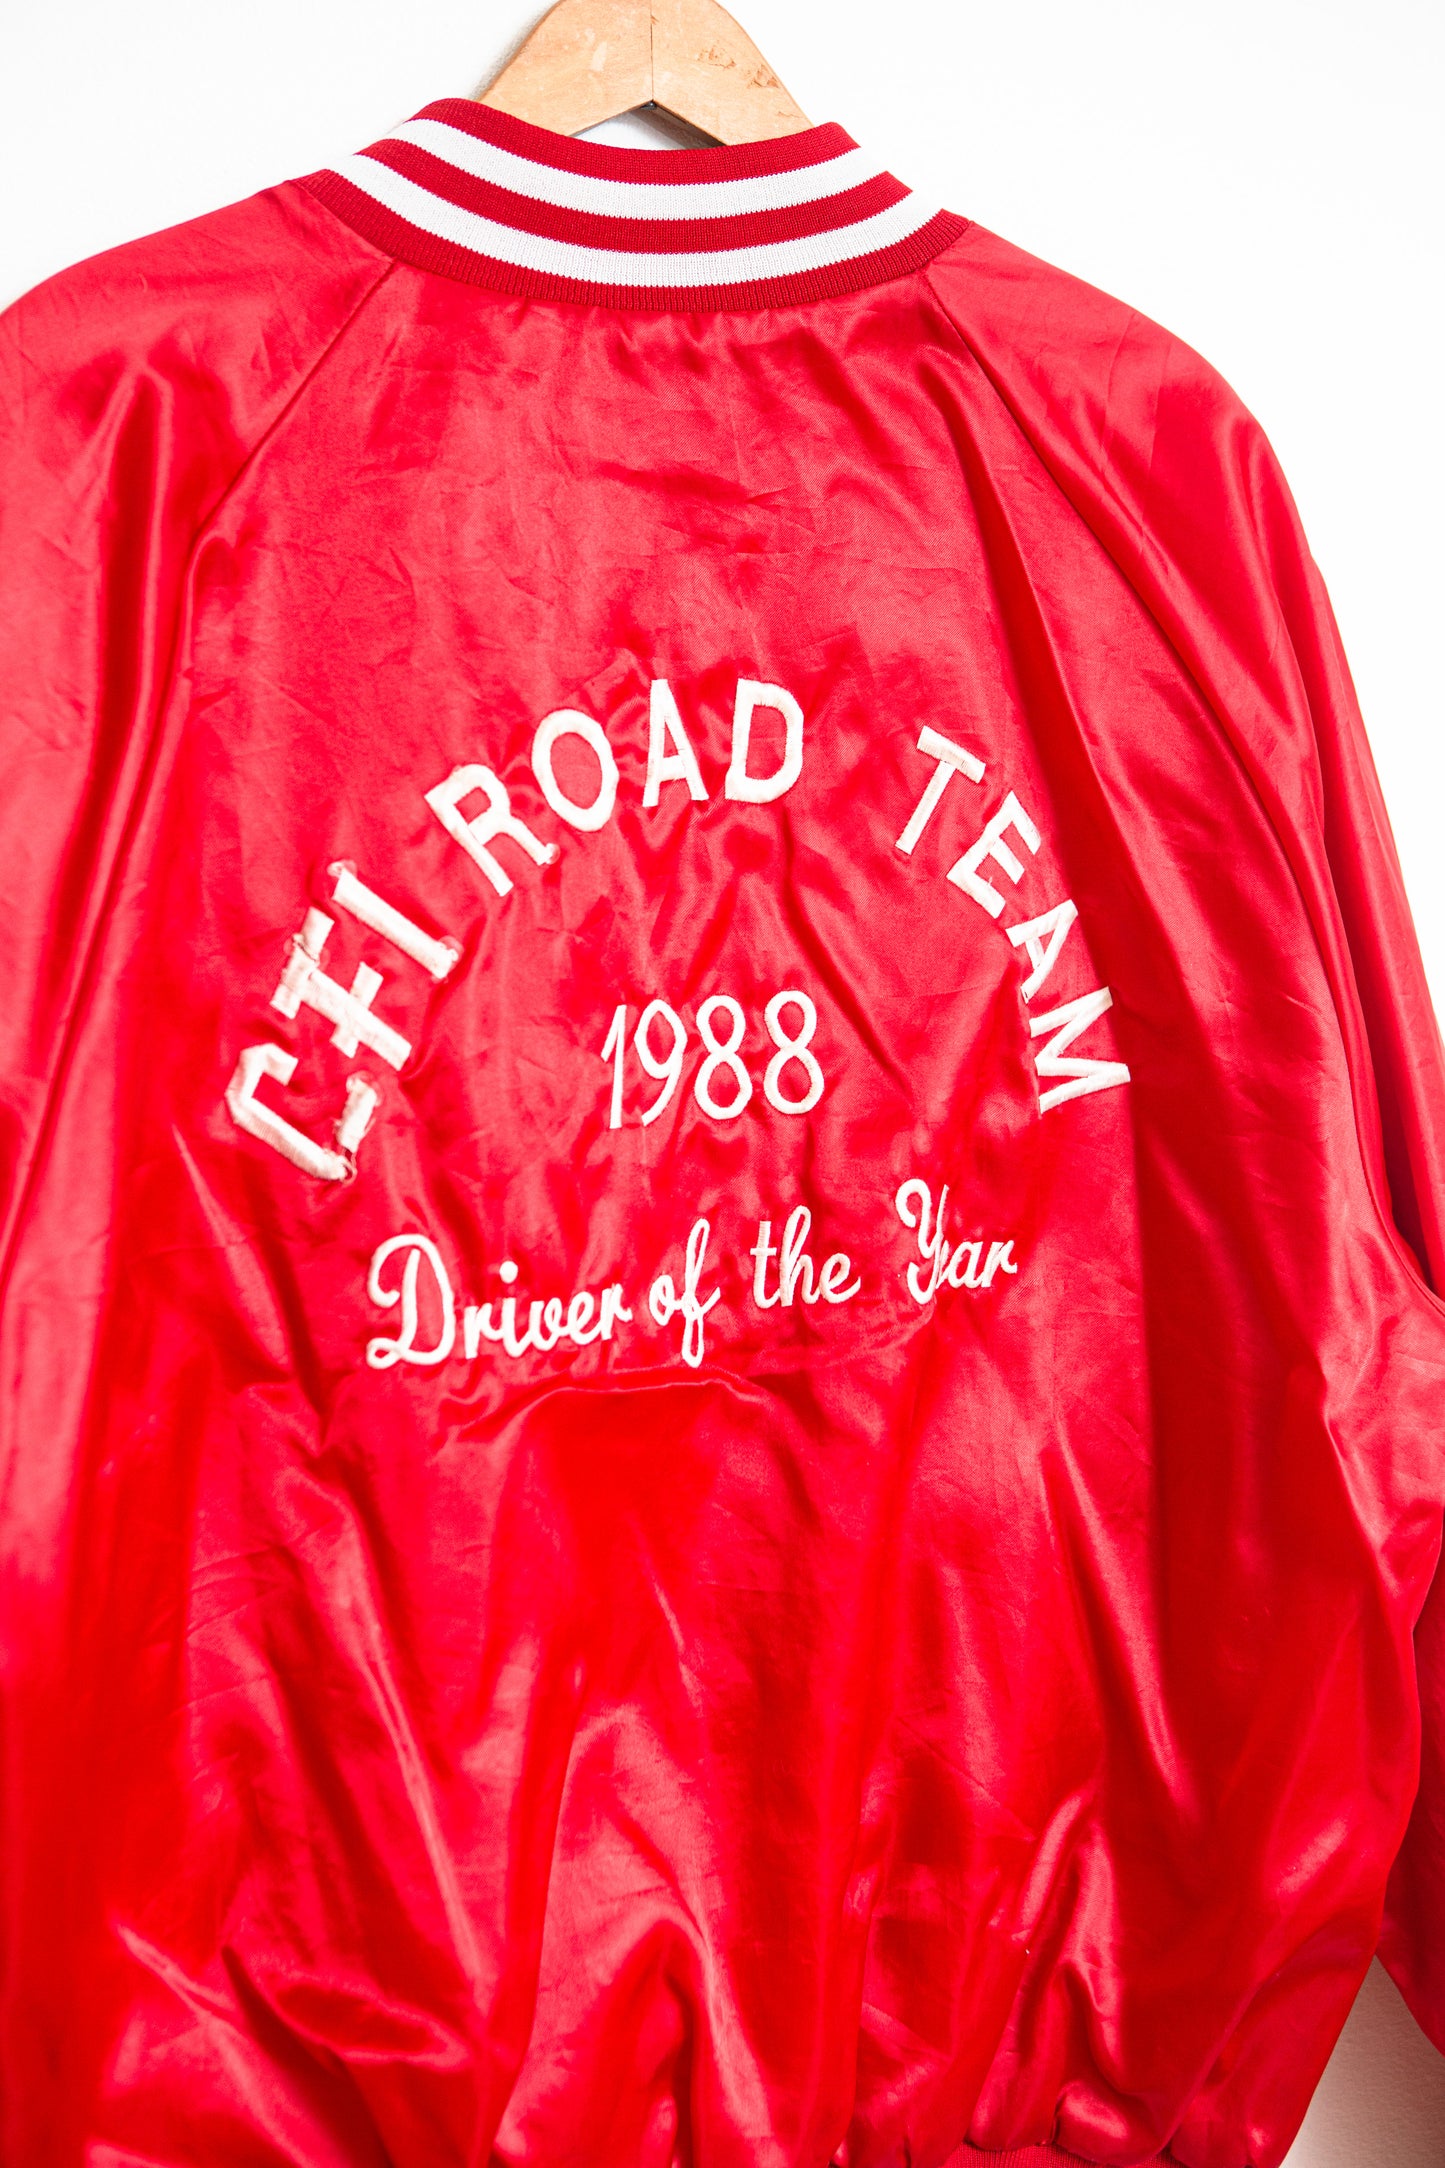 1988 Driver of the year | CFI Road Team | Satin Jacket